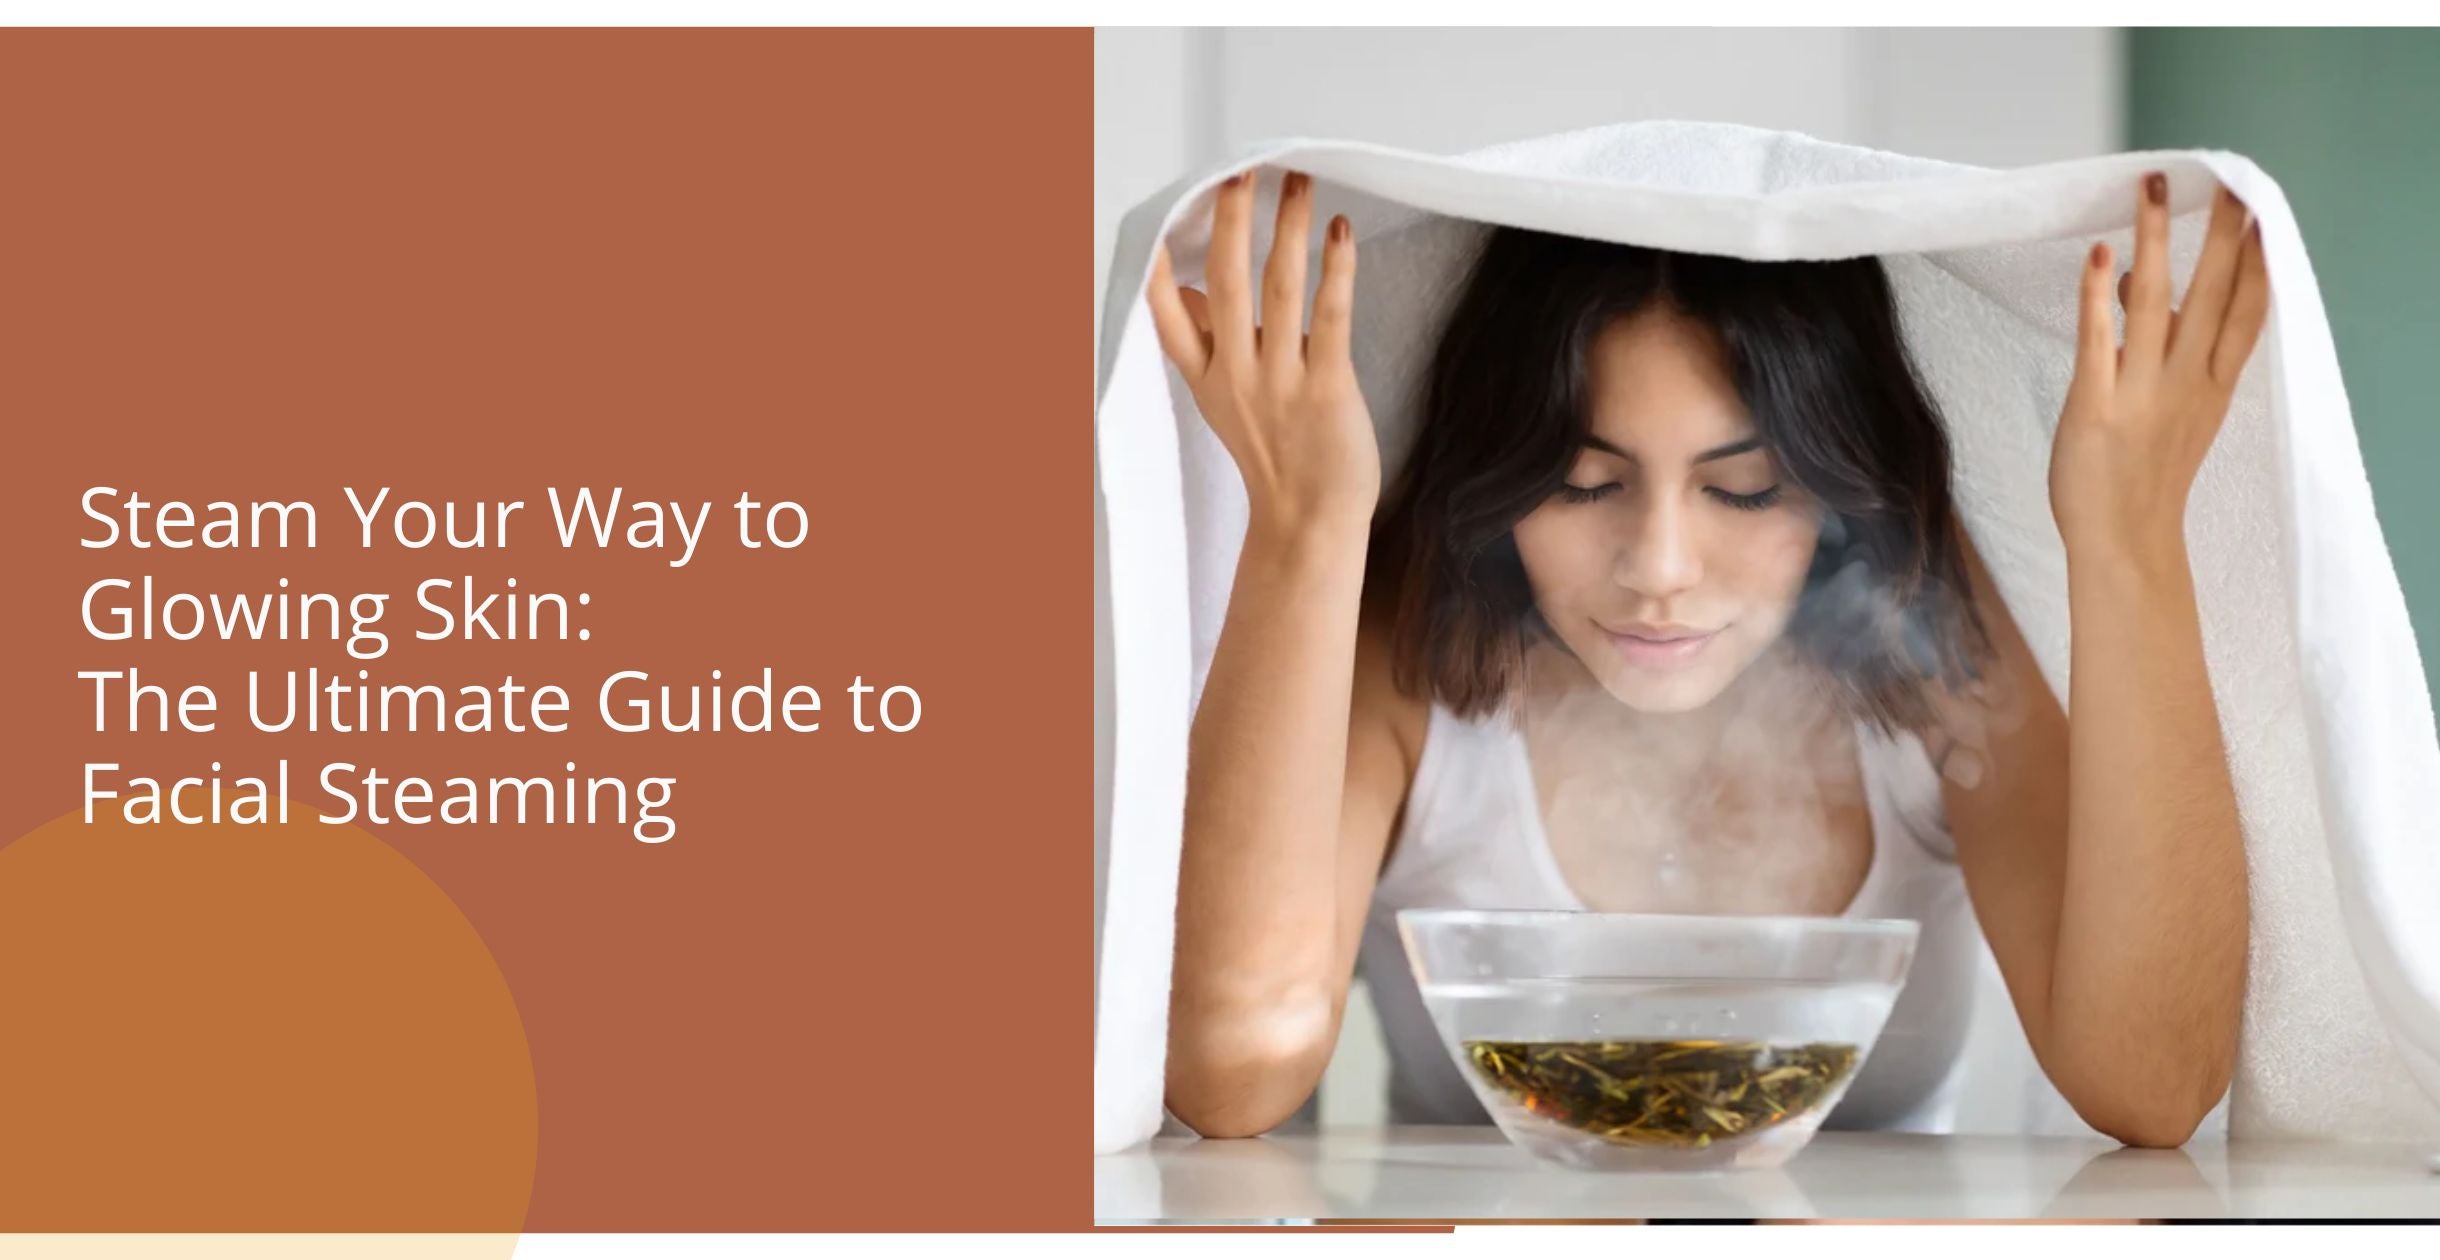 Steam Your Way to Glowing Skin: The Ultimate Guide to Facial Steaming